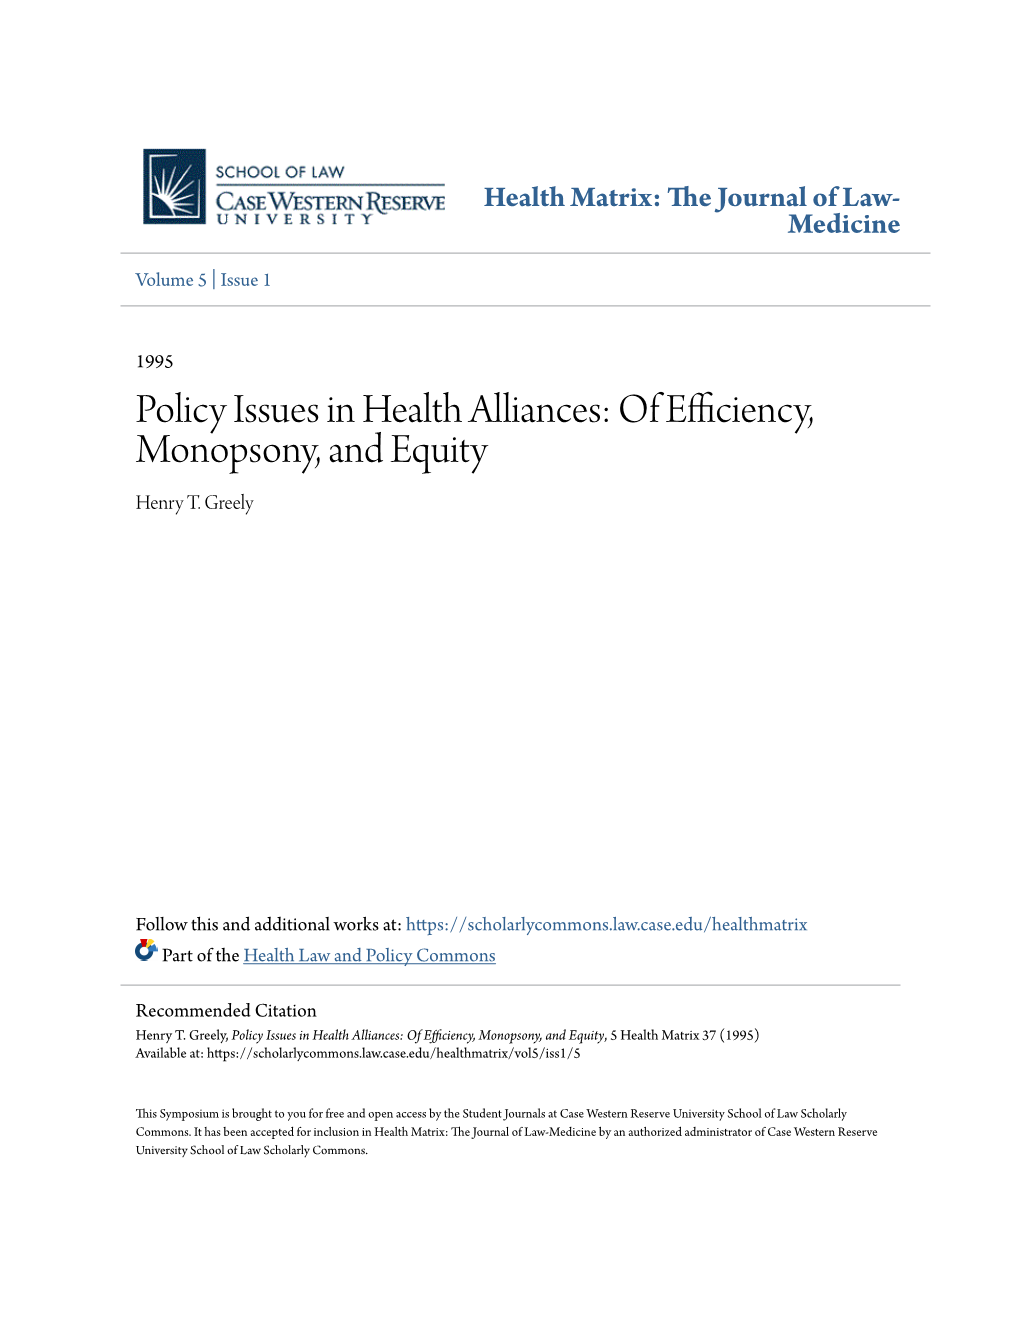 Policy Issues in Health Alliances: of Efficiency, Monopsony, and Equity Henry T